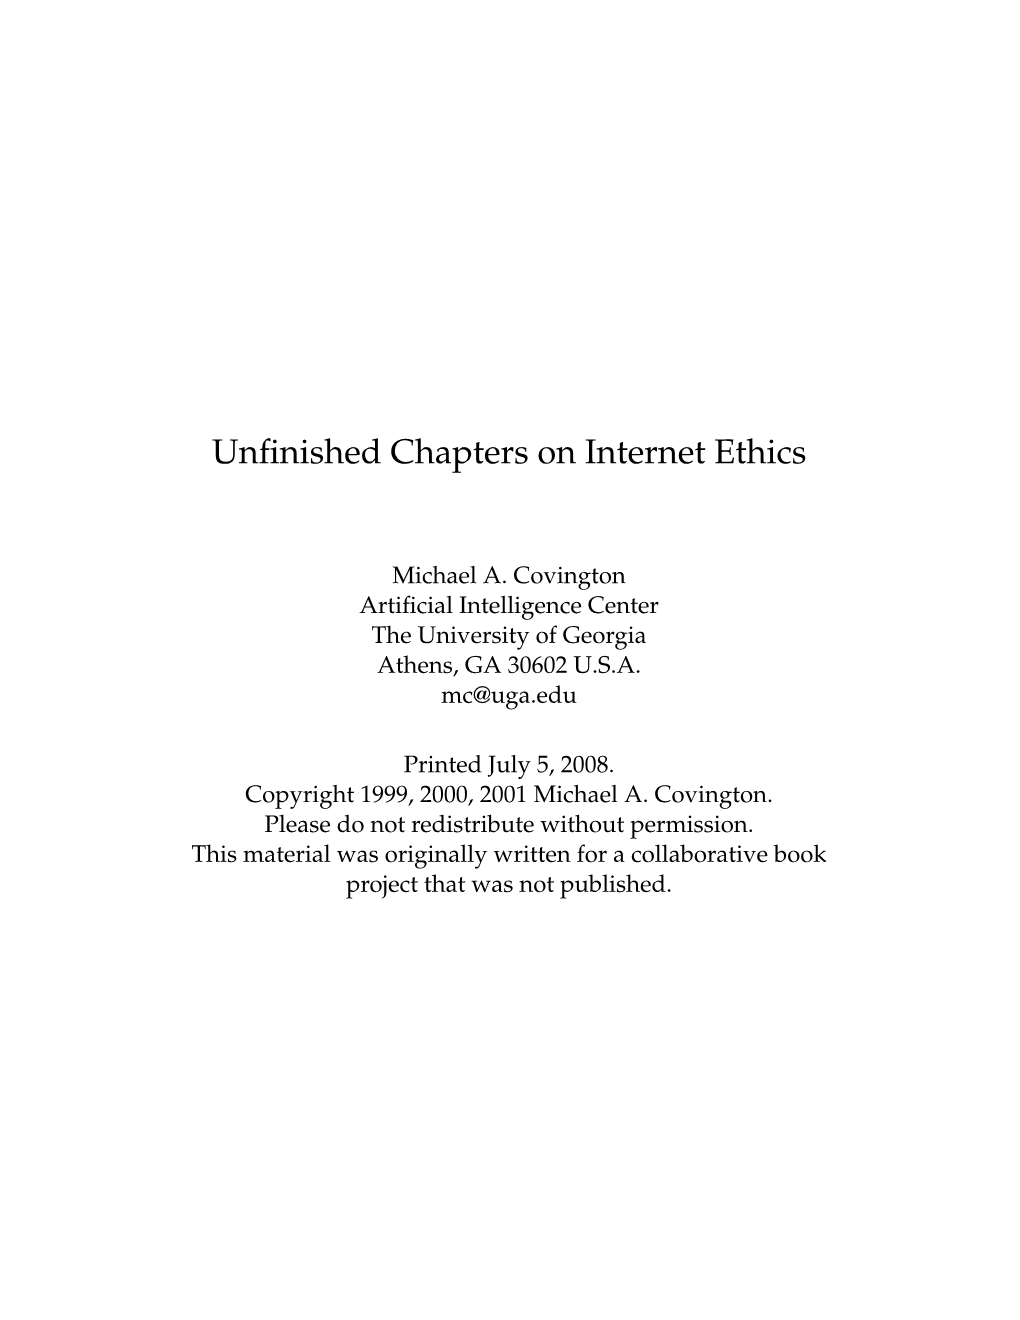 Unfinished Chapters on Internet Ethics